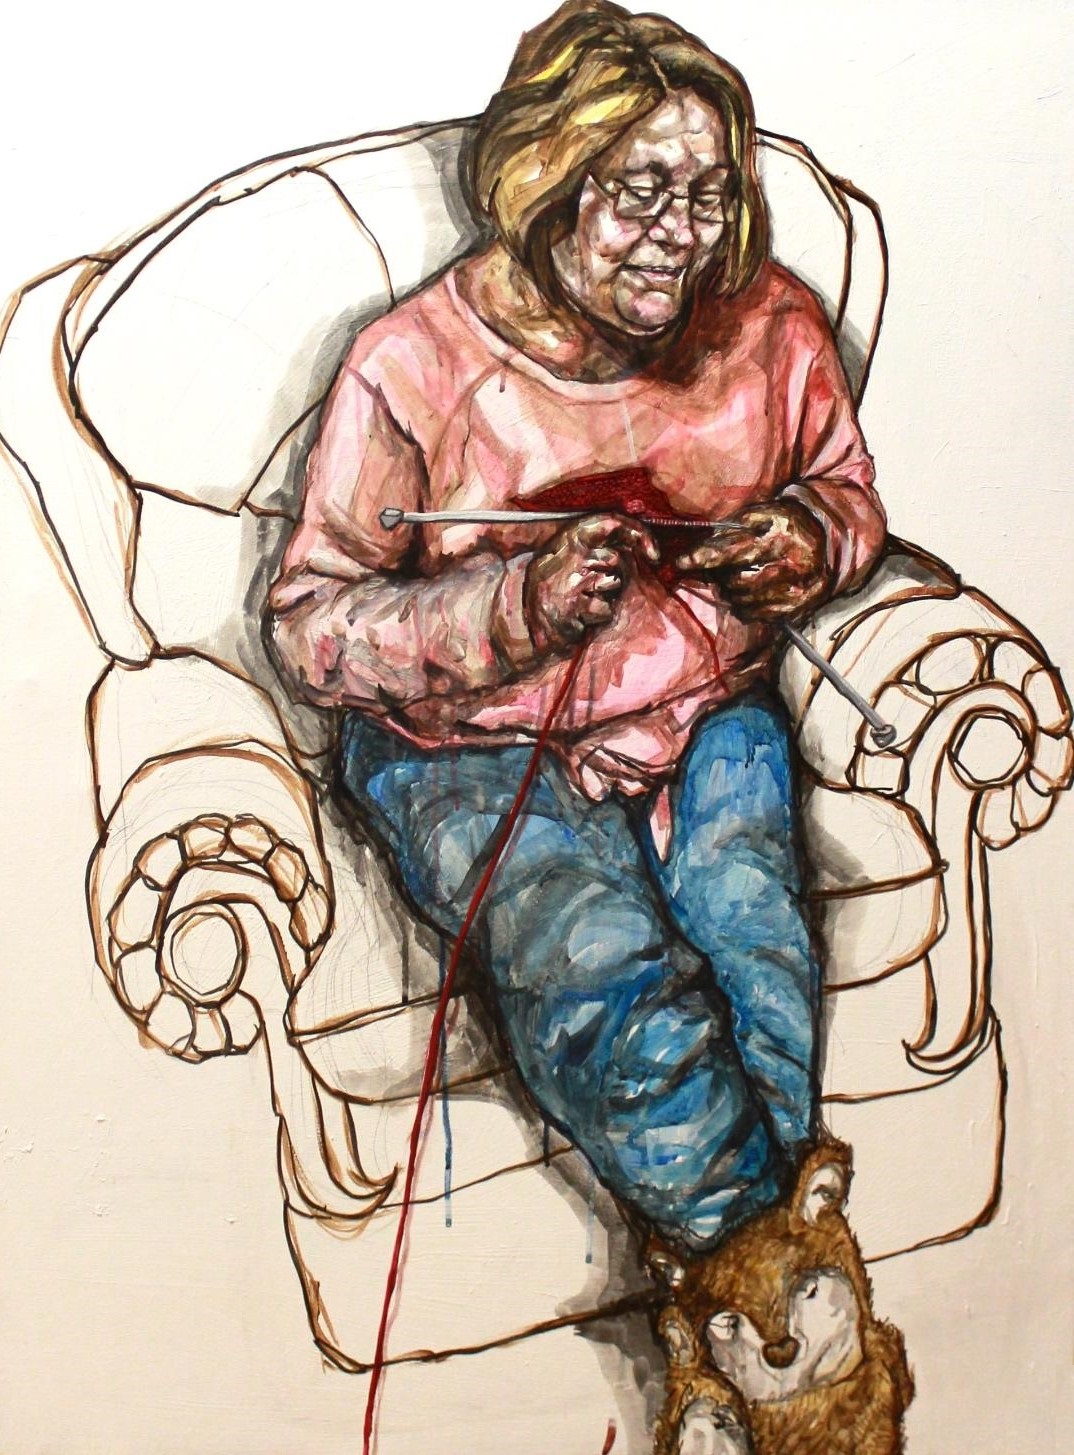 Mum knitting, through the eyes of Vanessa Bell , 2016Thom Kofoed Acrylic on canvas, 23x33in